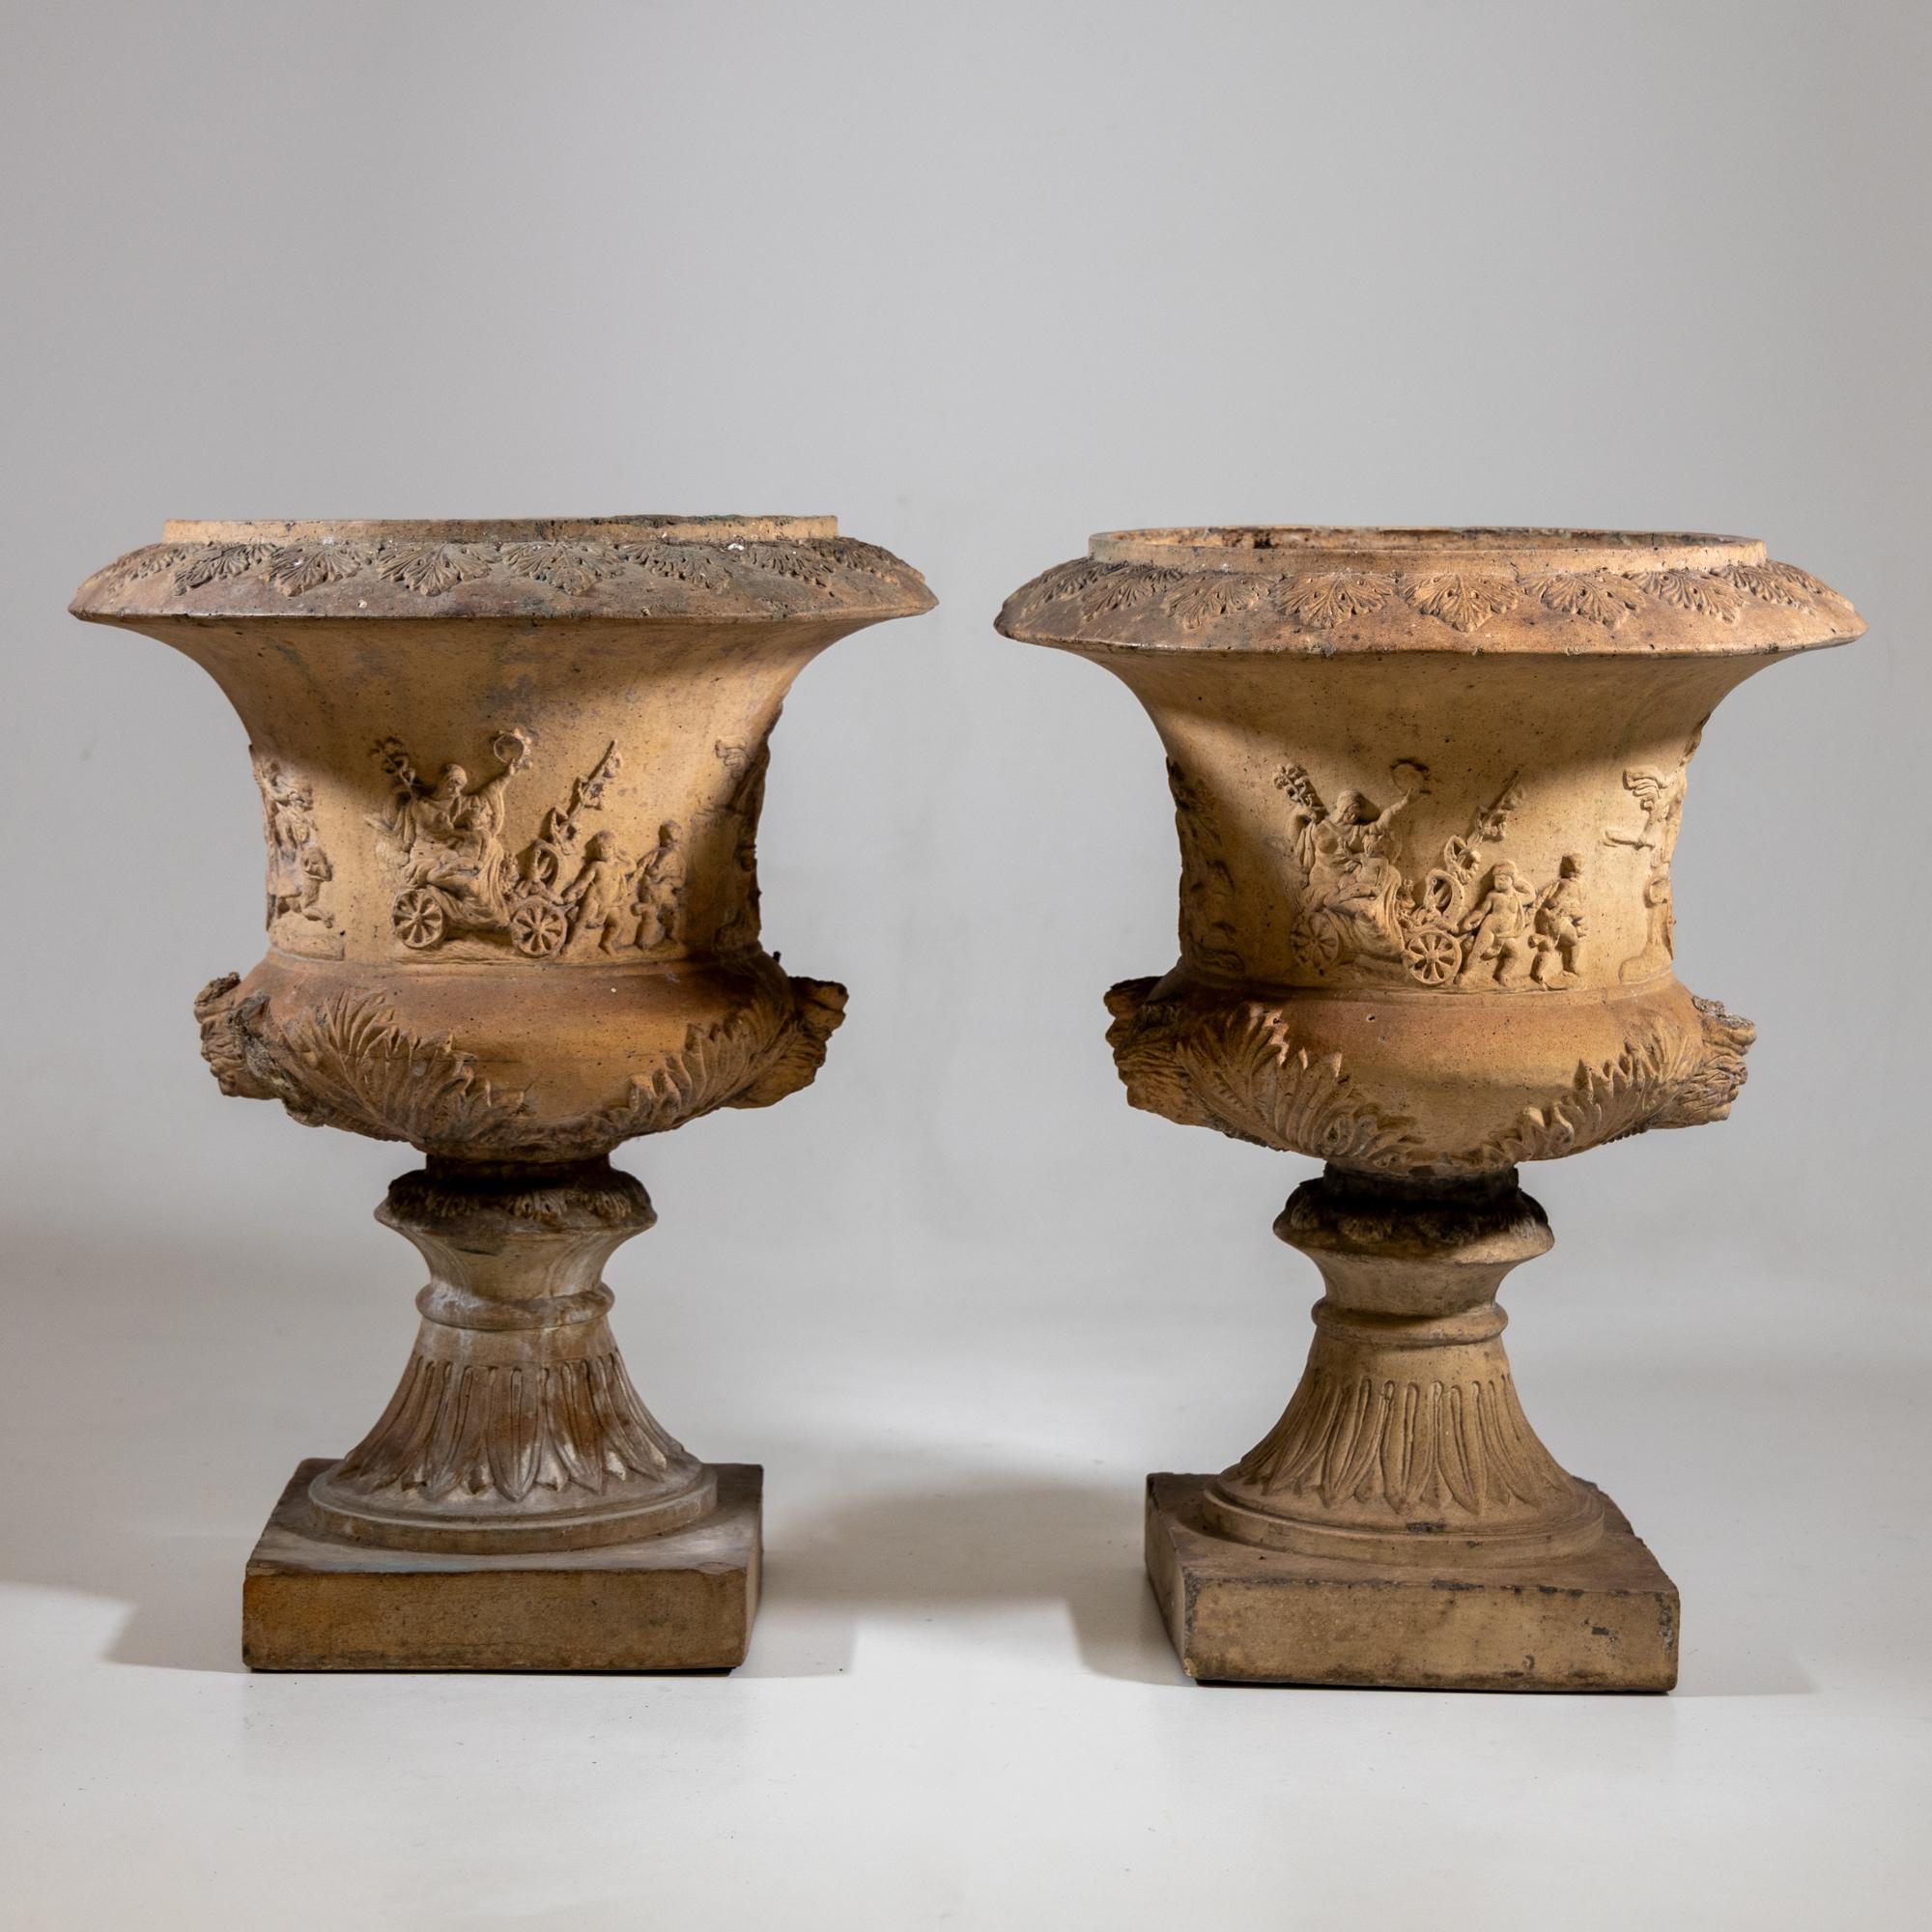 Terracotta Crater Vases, Italy 2nd Half 19th Century In Good Condition For Sale In Greding, DE